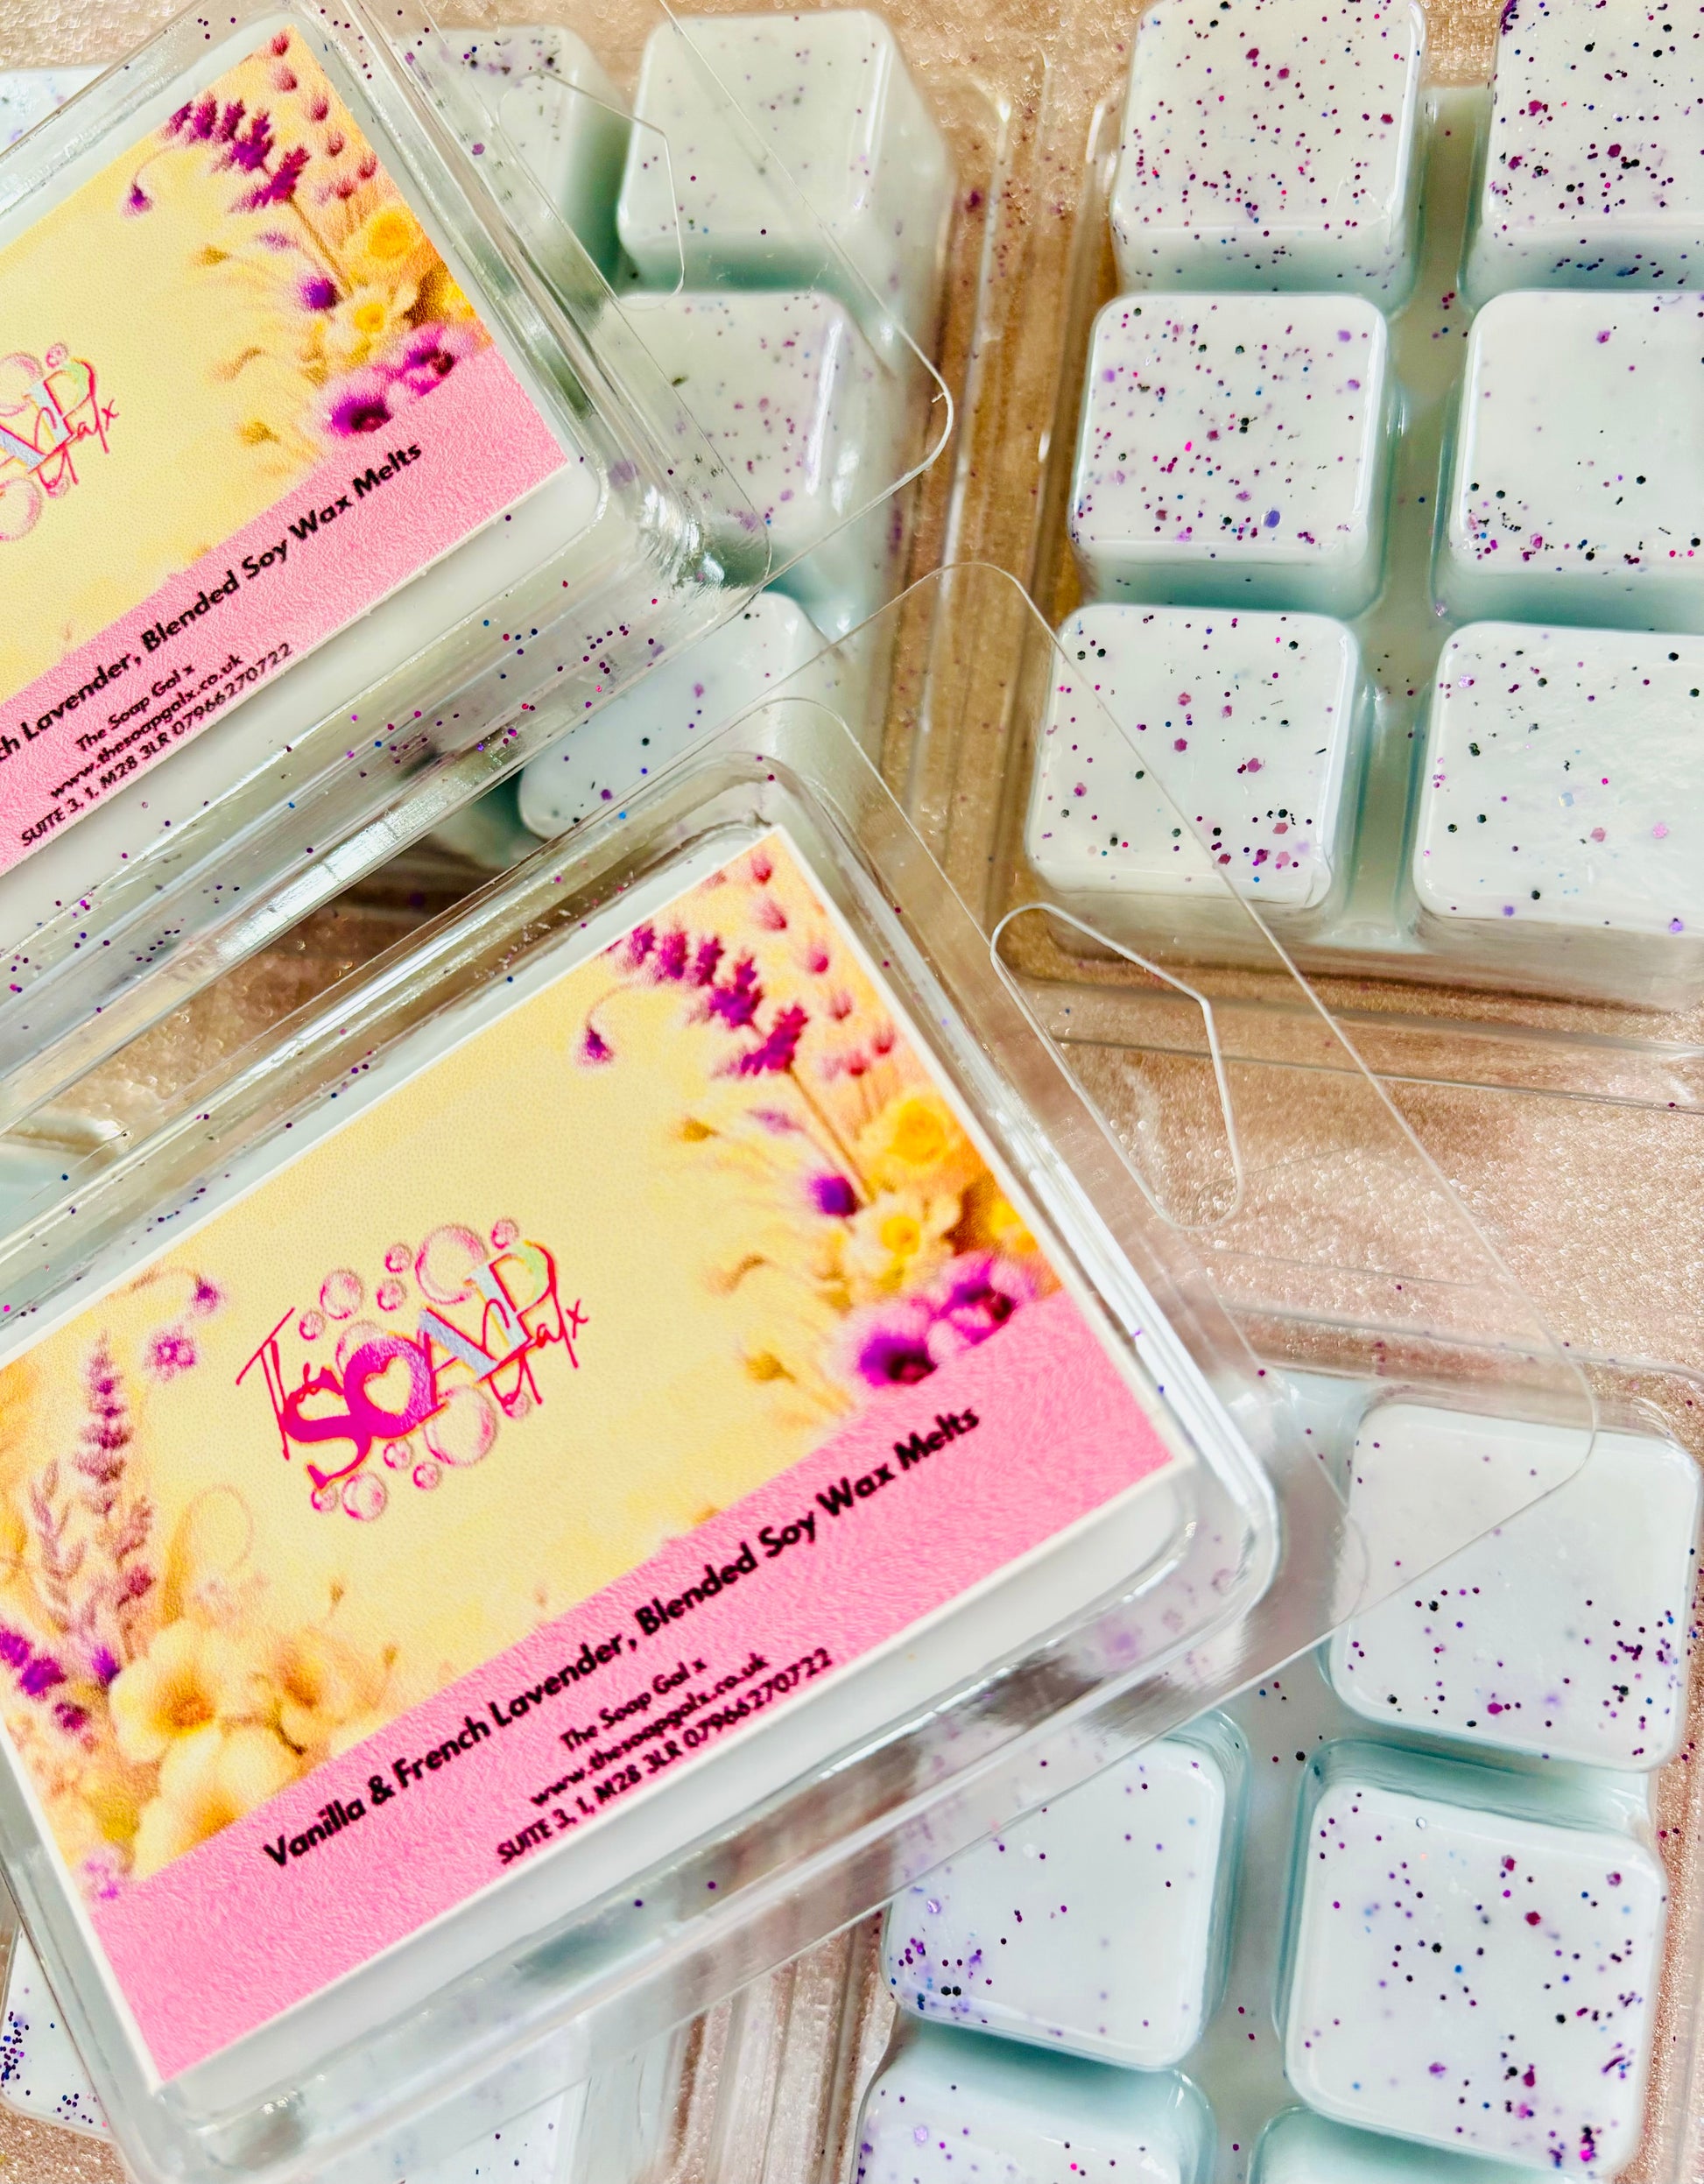 Packaged Lavender and Vanilla Wax Melts with floral design beside loose Lavender and Vanilla Wax Melts with purple speckles from The Soap Gal.